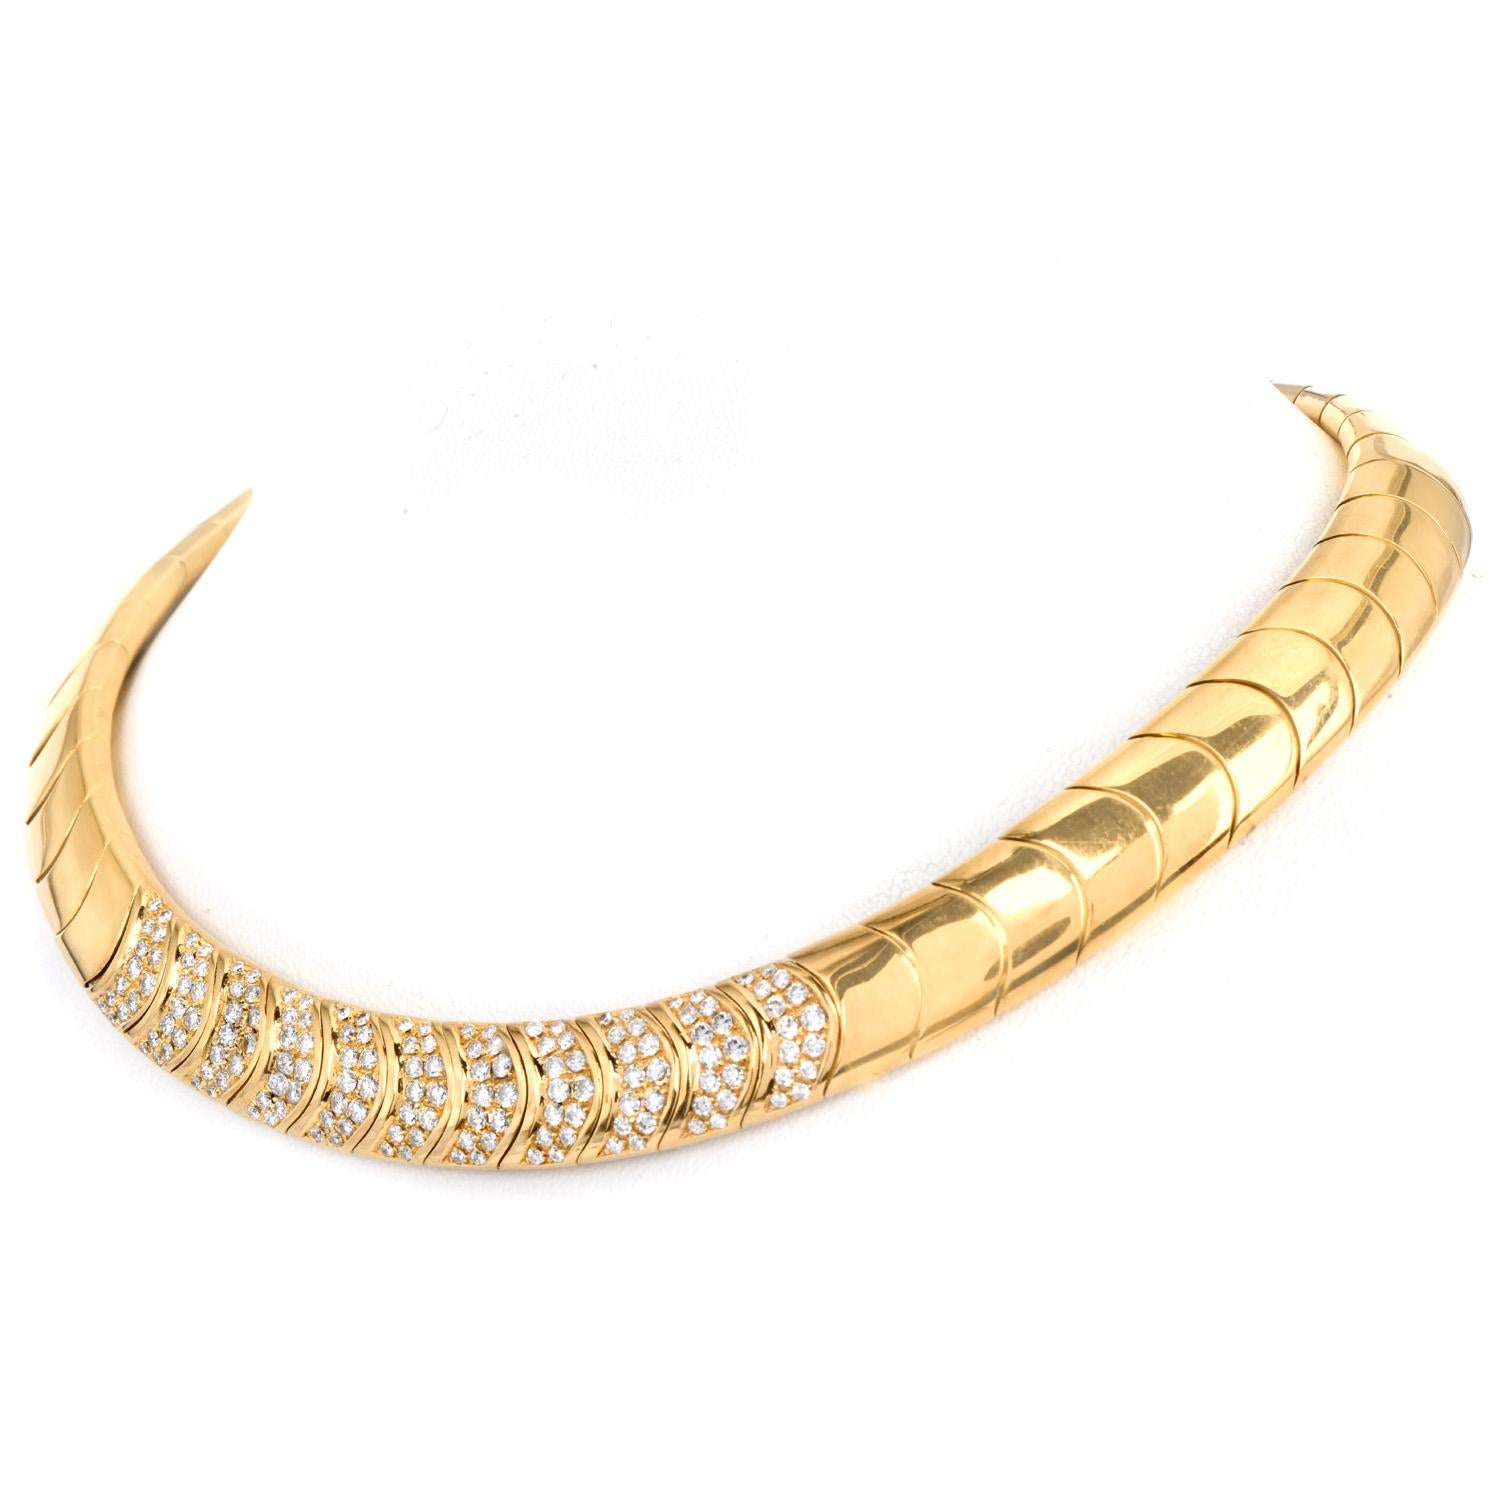 Presenting an Estate 18K Yellow Gold Diamond Collar Necklace 

Crafted in Italian 18K Gold with natural round cut diamonds makes a perfect statement necklace. Articulated flexible Curved links around the collar necklace design help the necklace sit